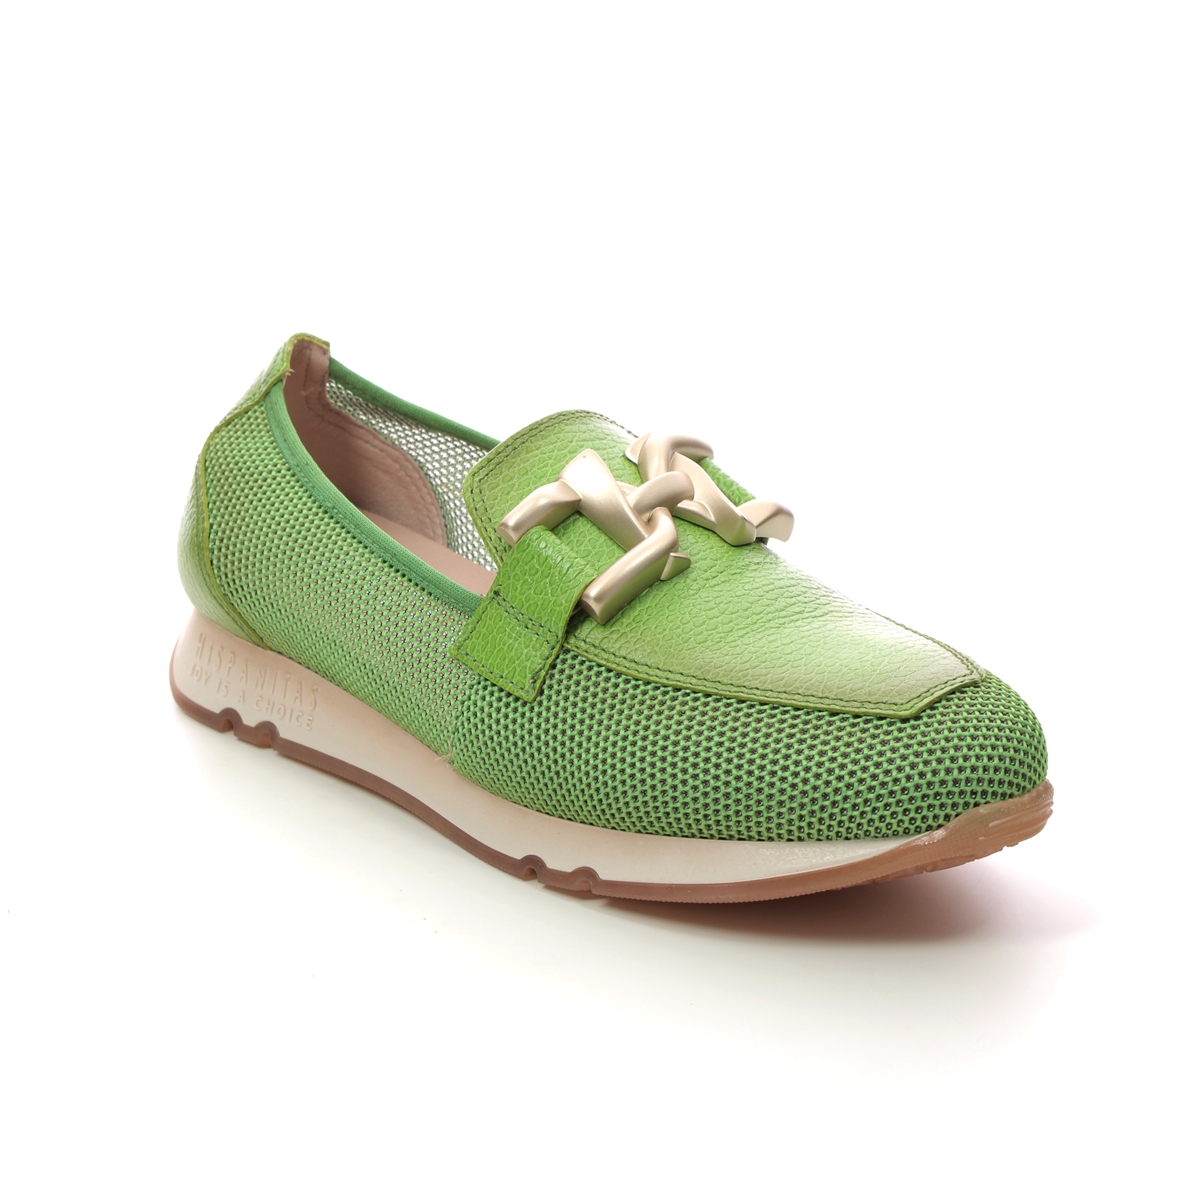 Hispanitas Kaira Green Womens loafers HV232809-90 in a Plain Leather and Textile in Size 37